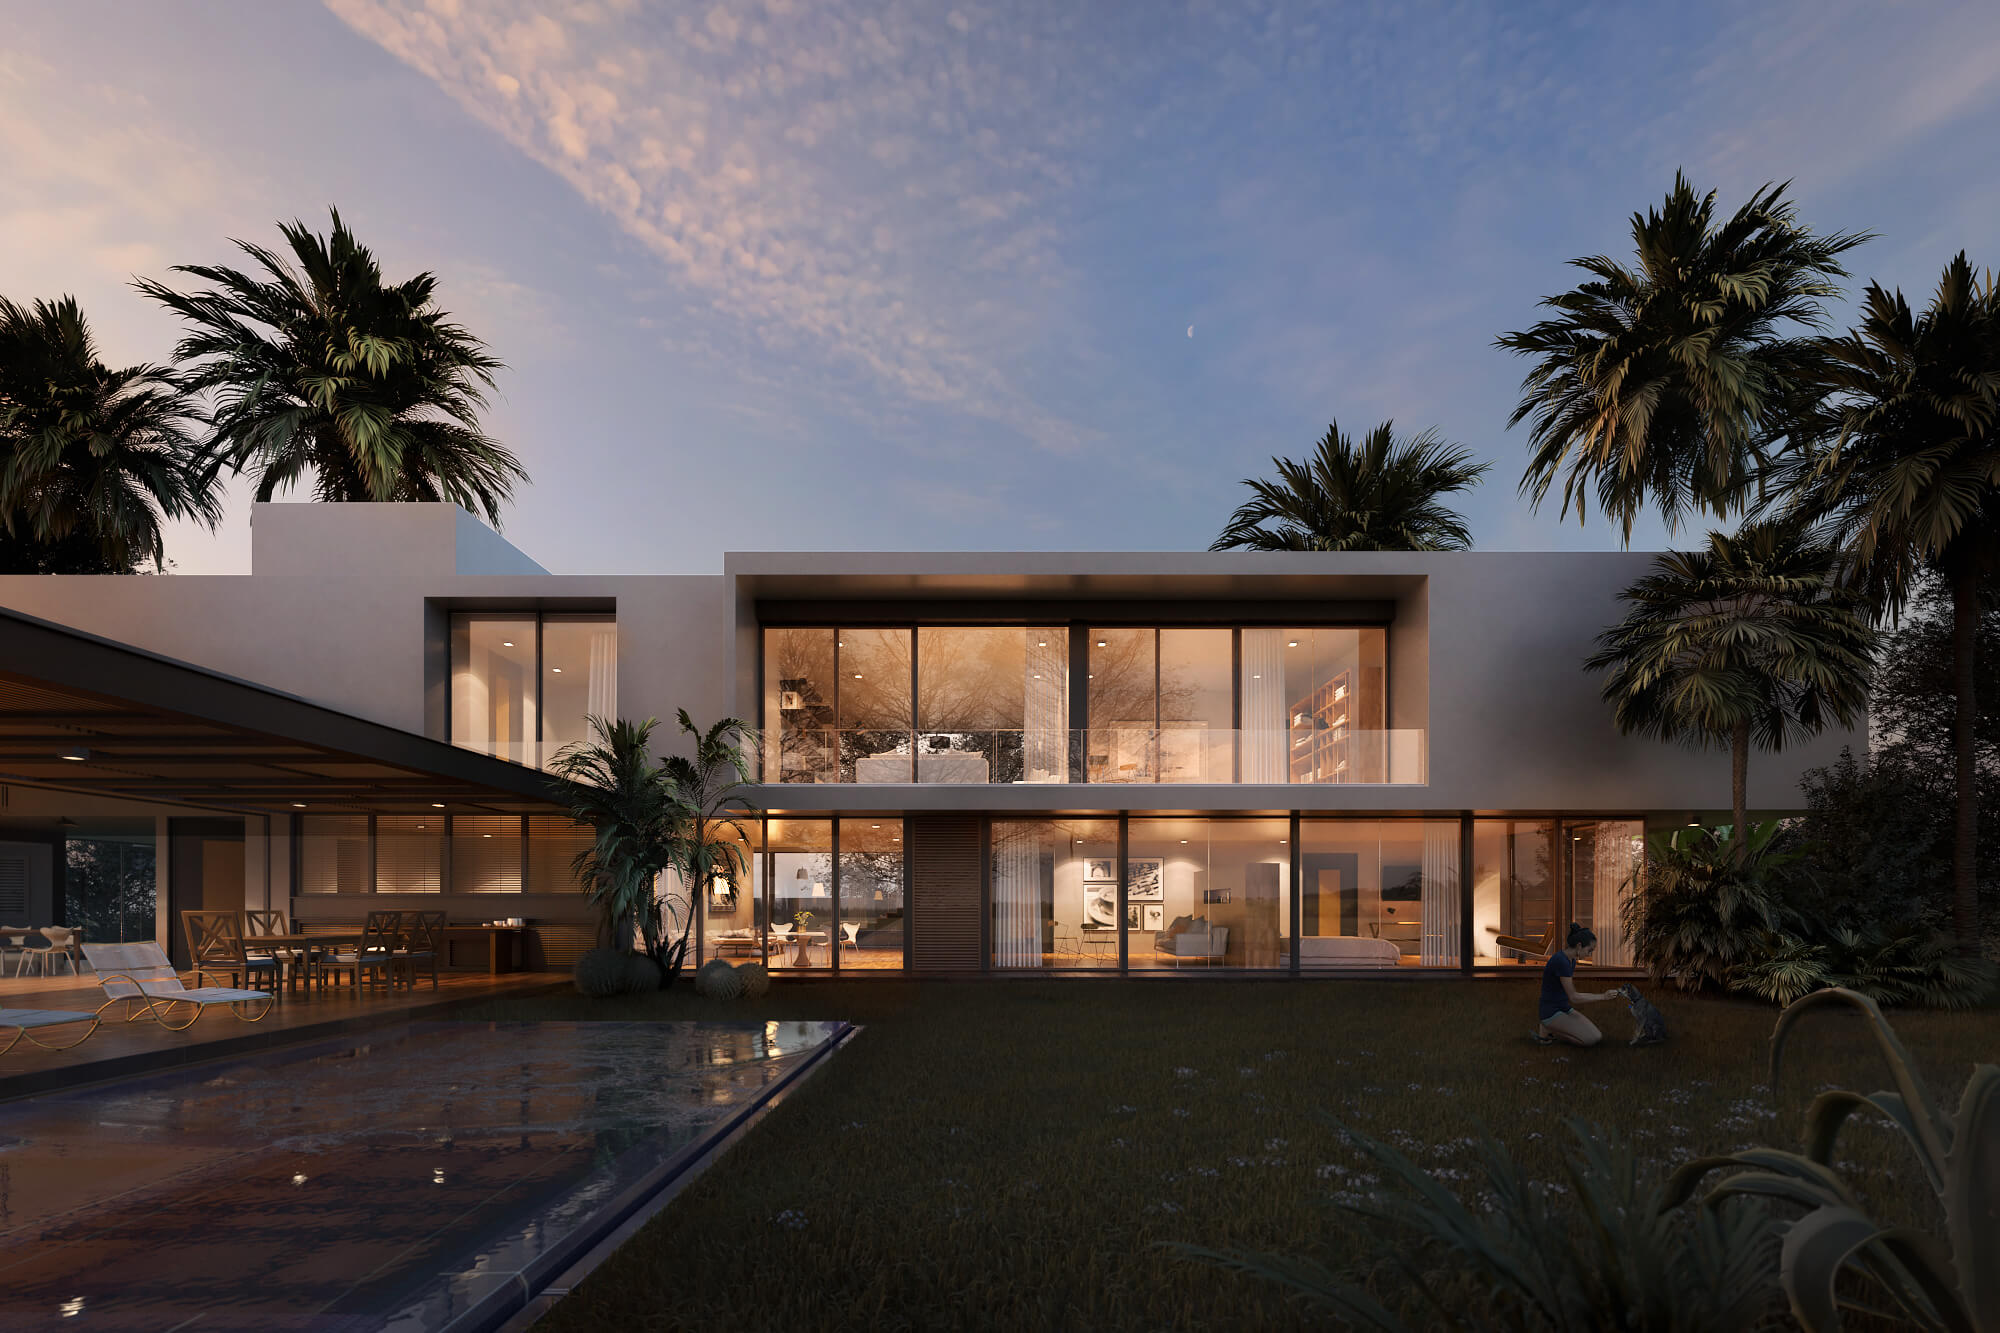 Residential Architectural Rendering for a House in California